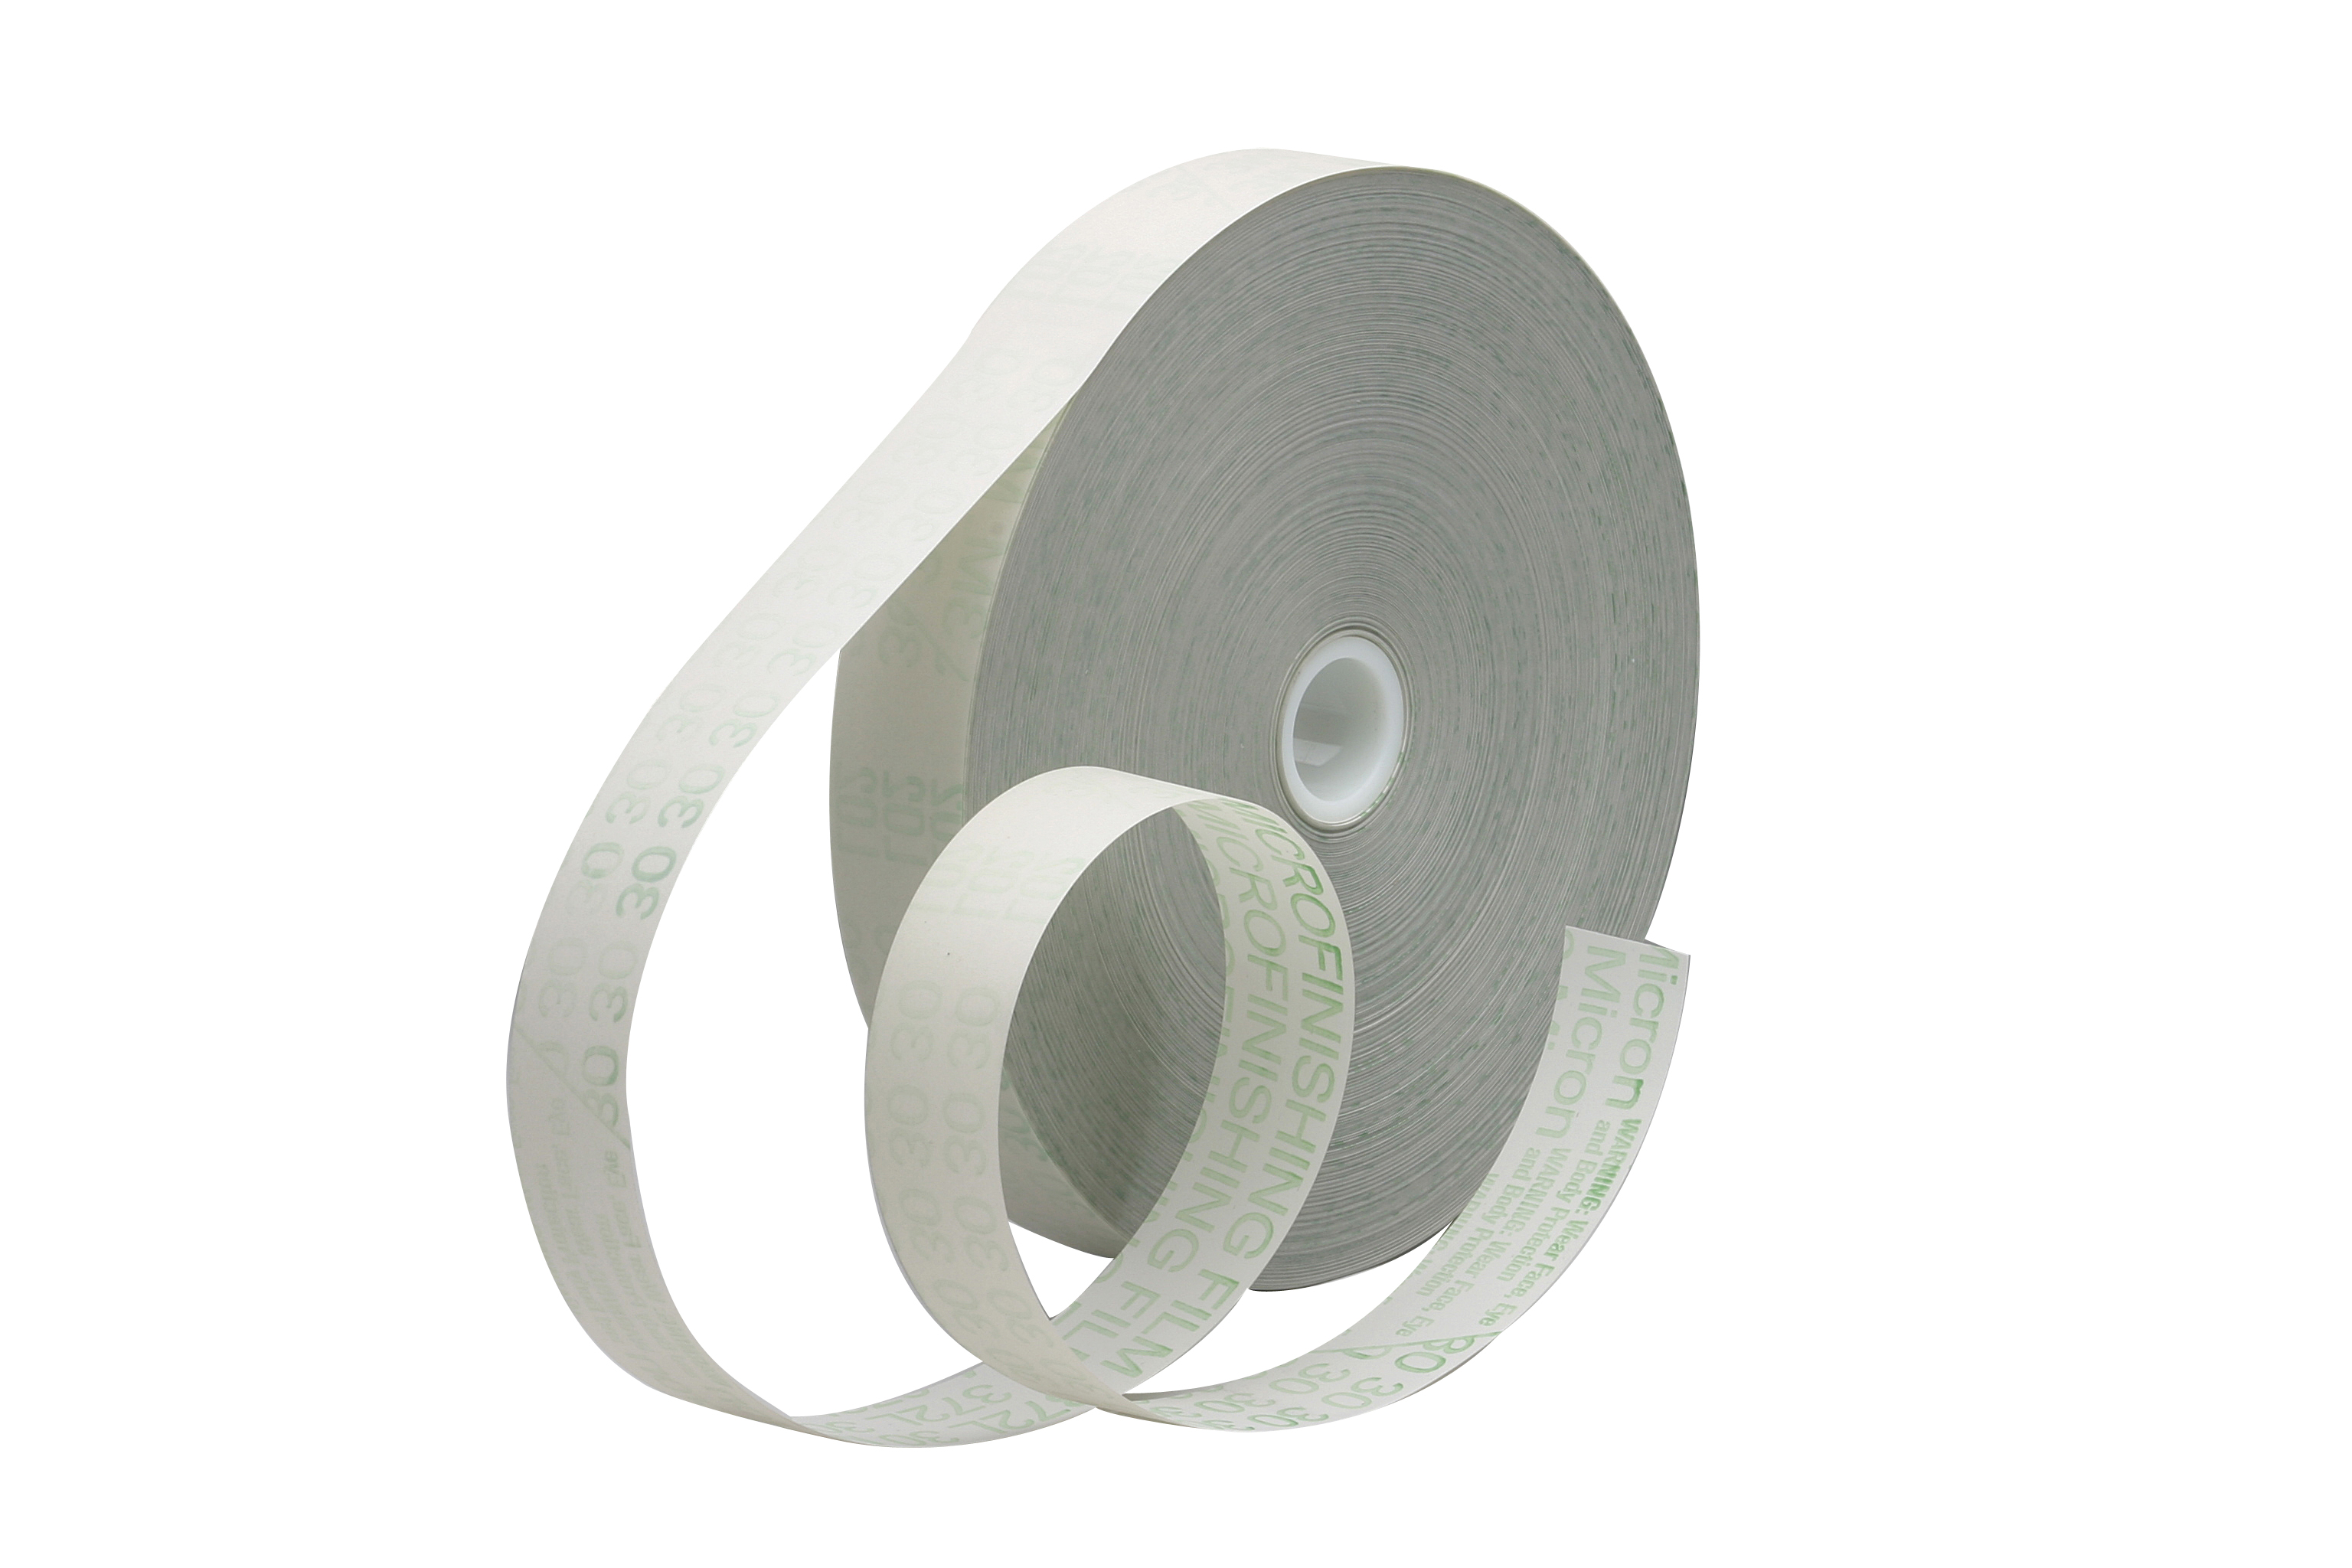 00638060710548 3M™ Microfinishing Film Roll 372L, 60 Mic 5MIL, 0.59 in x  1200 ft x in (14.98mmx365.75m), Plastic Core, ASO, End Roll Mark Black  Aircraft products film-sheets--rolls 9338343